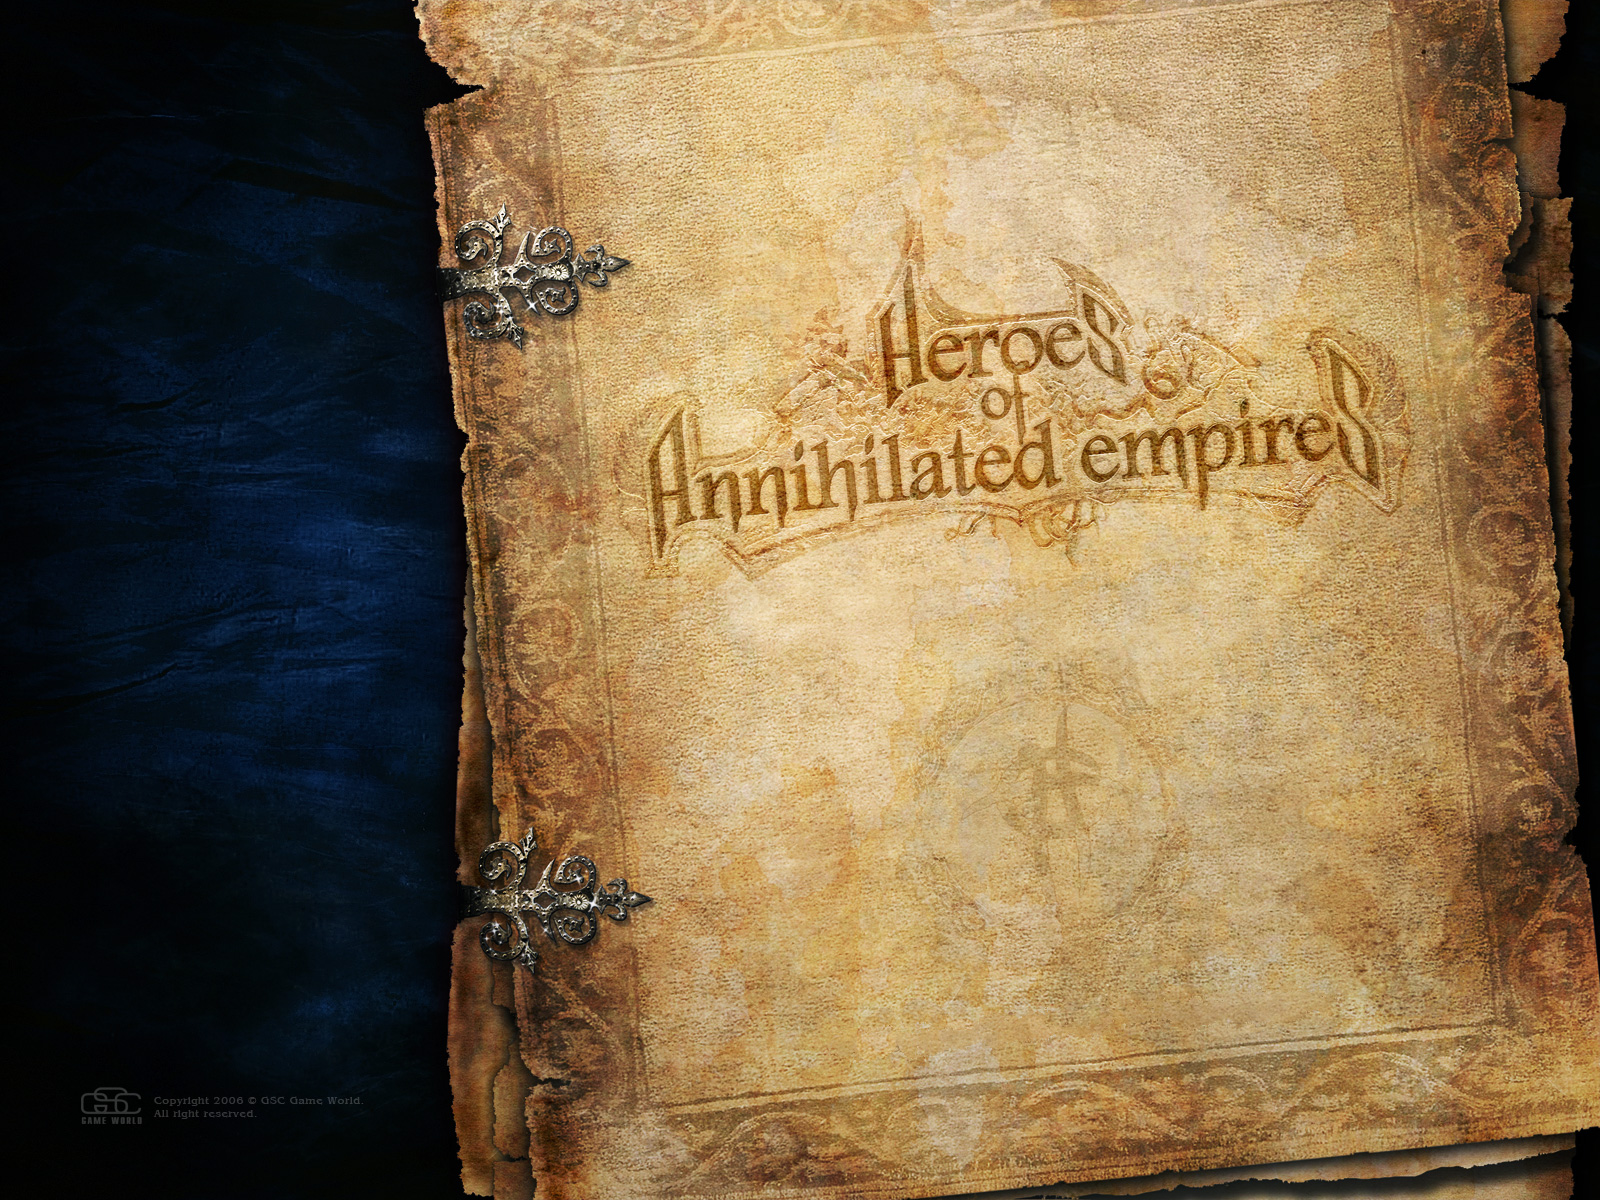 Heroes_of_annihilated_empires_03_1600x1200.jpg